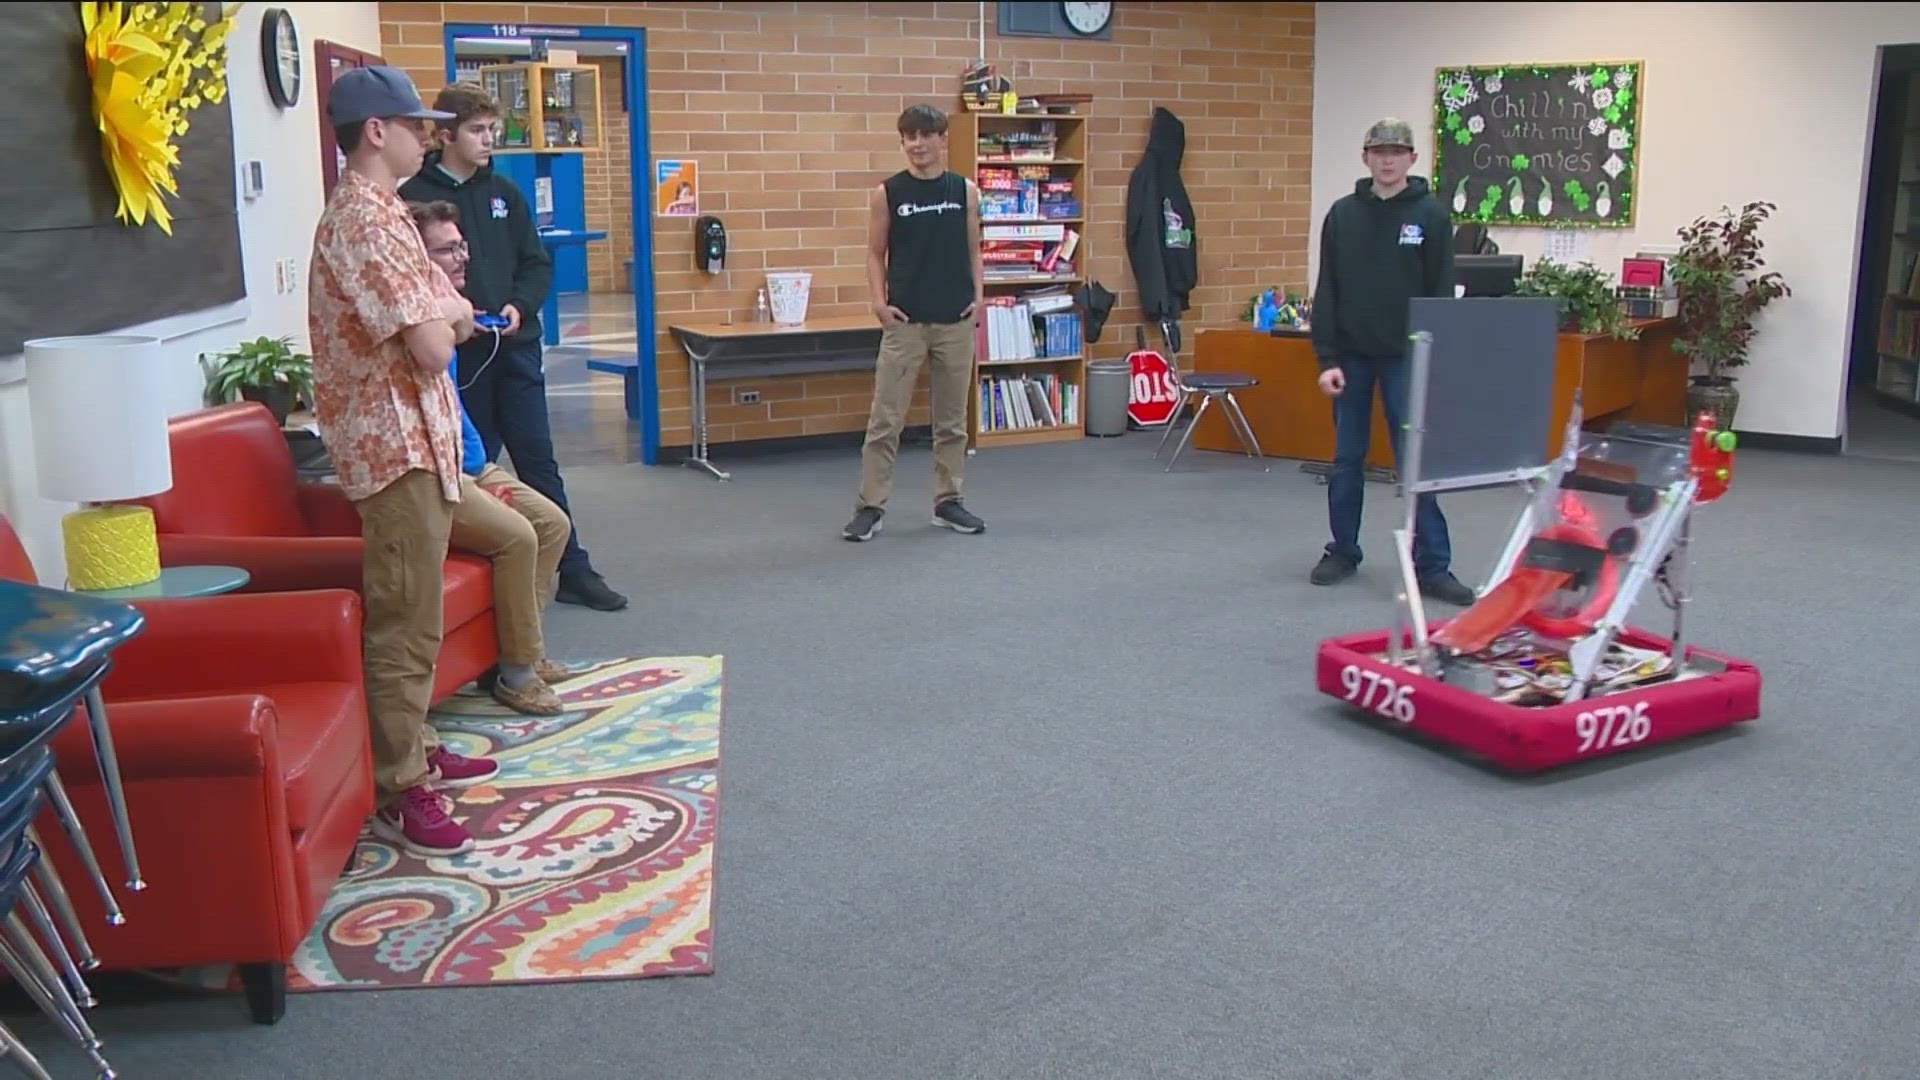 Notus High School is sending two robotics teams to the world championships hosted in Houston, Texas.